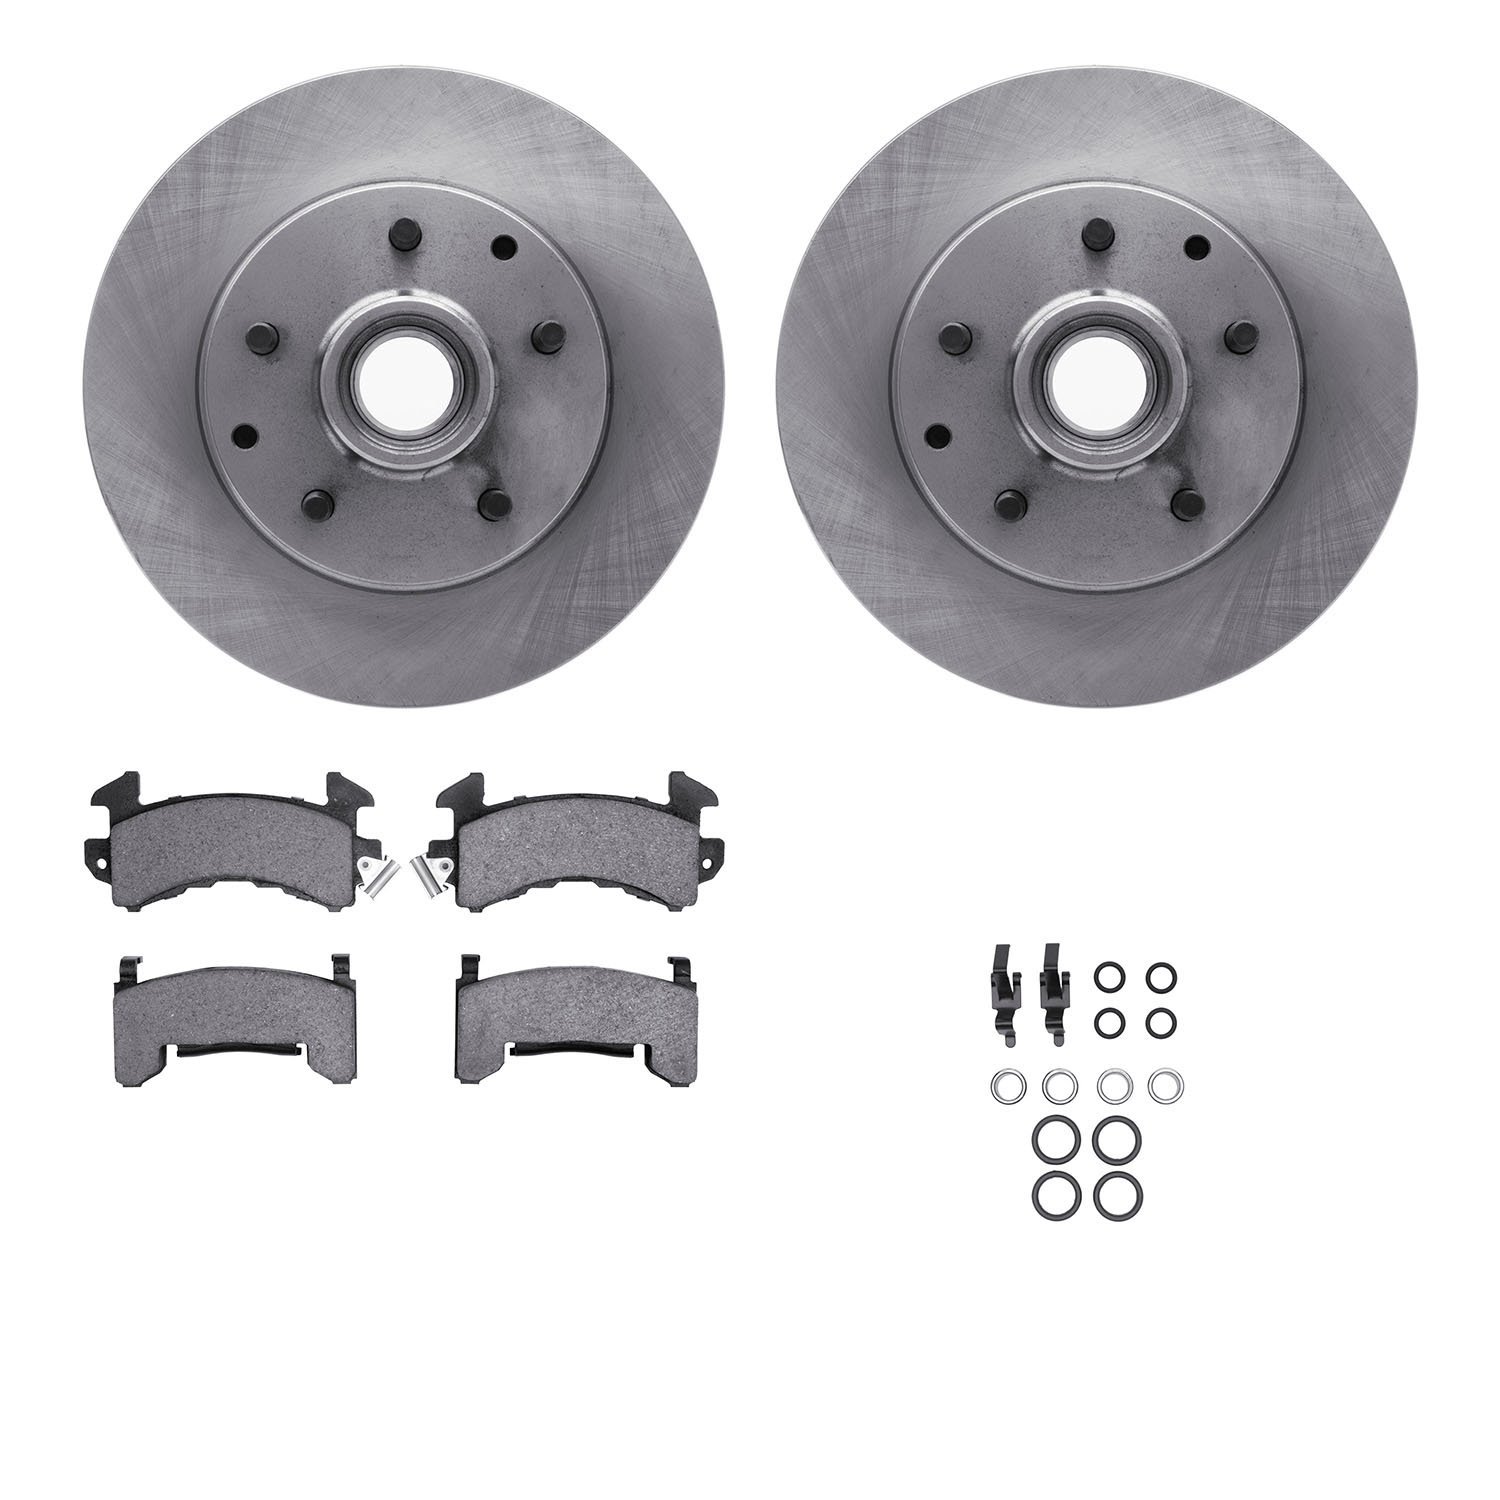 6412-48028 Brake Rotors with Ultimate-Duty Brake Pads Kit & Hardware, 1991-2003 GM, Position: Front